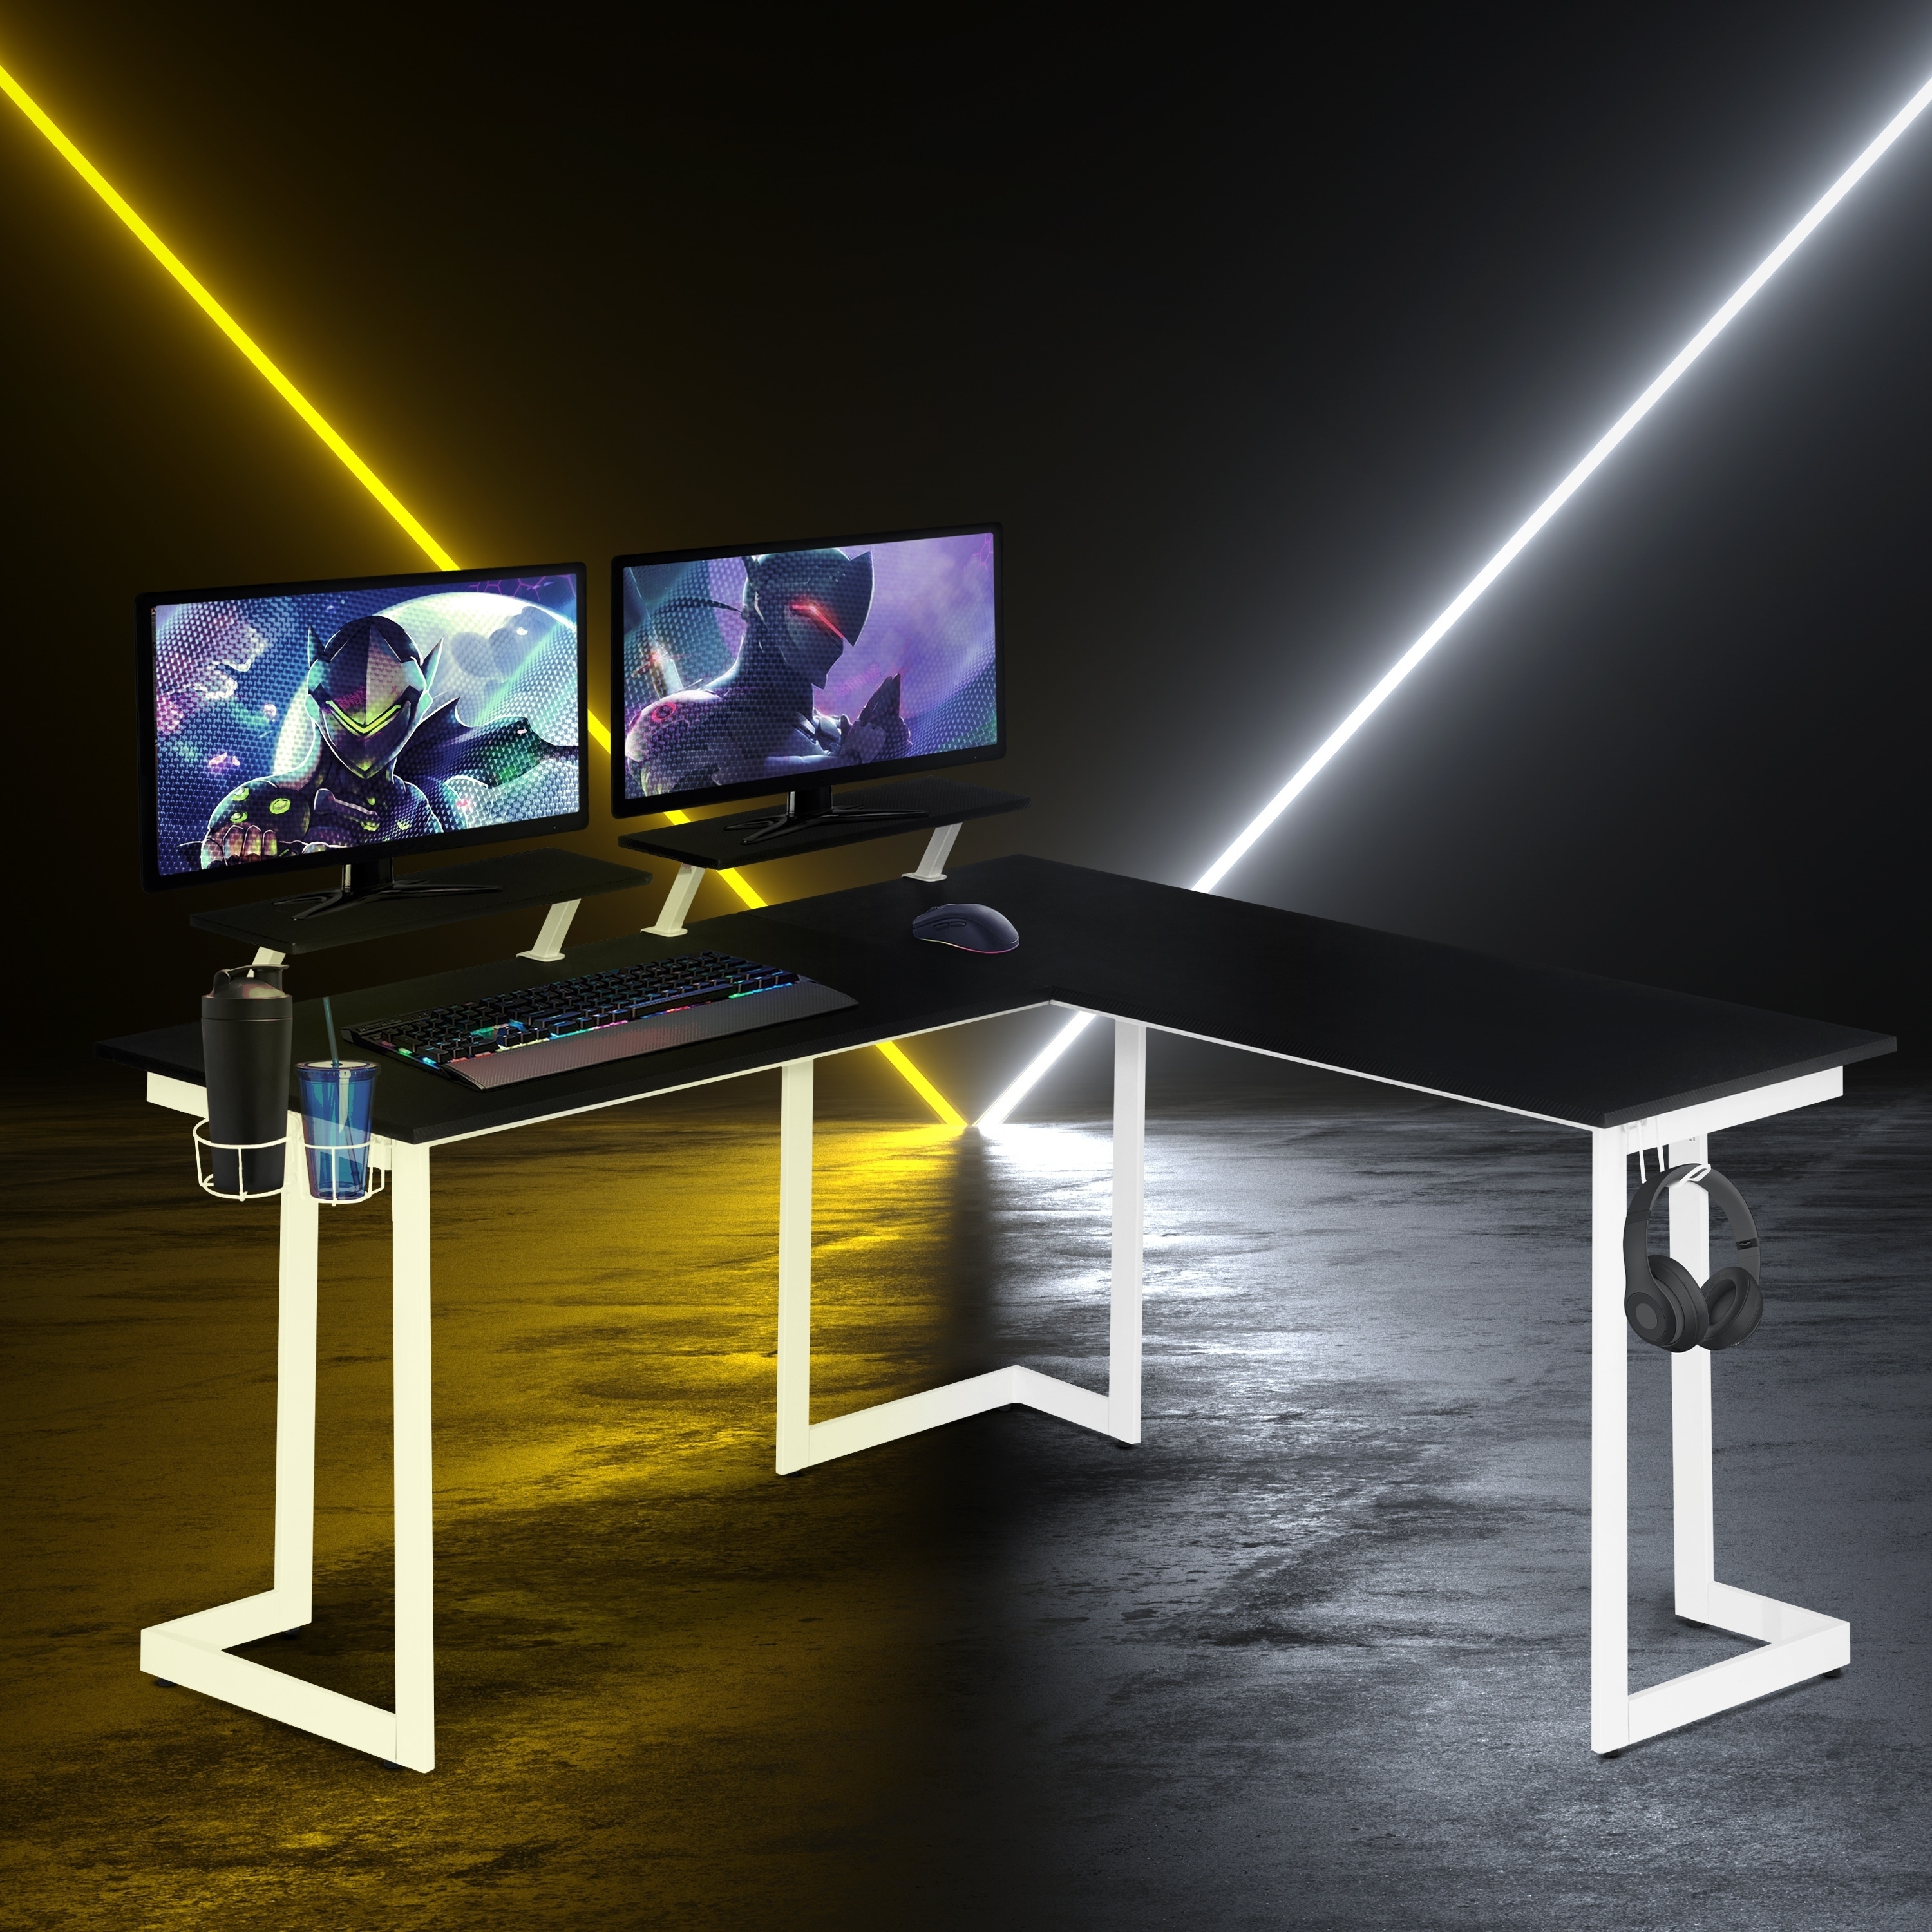 L Shaped Gaming Desk with LED Lights - Carbon Fiber - Designlab by Office Star Products